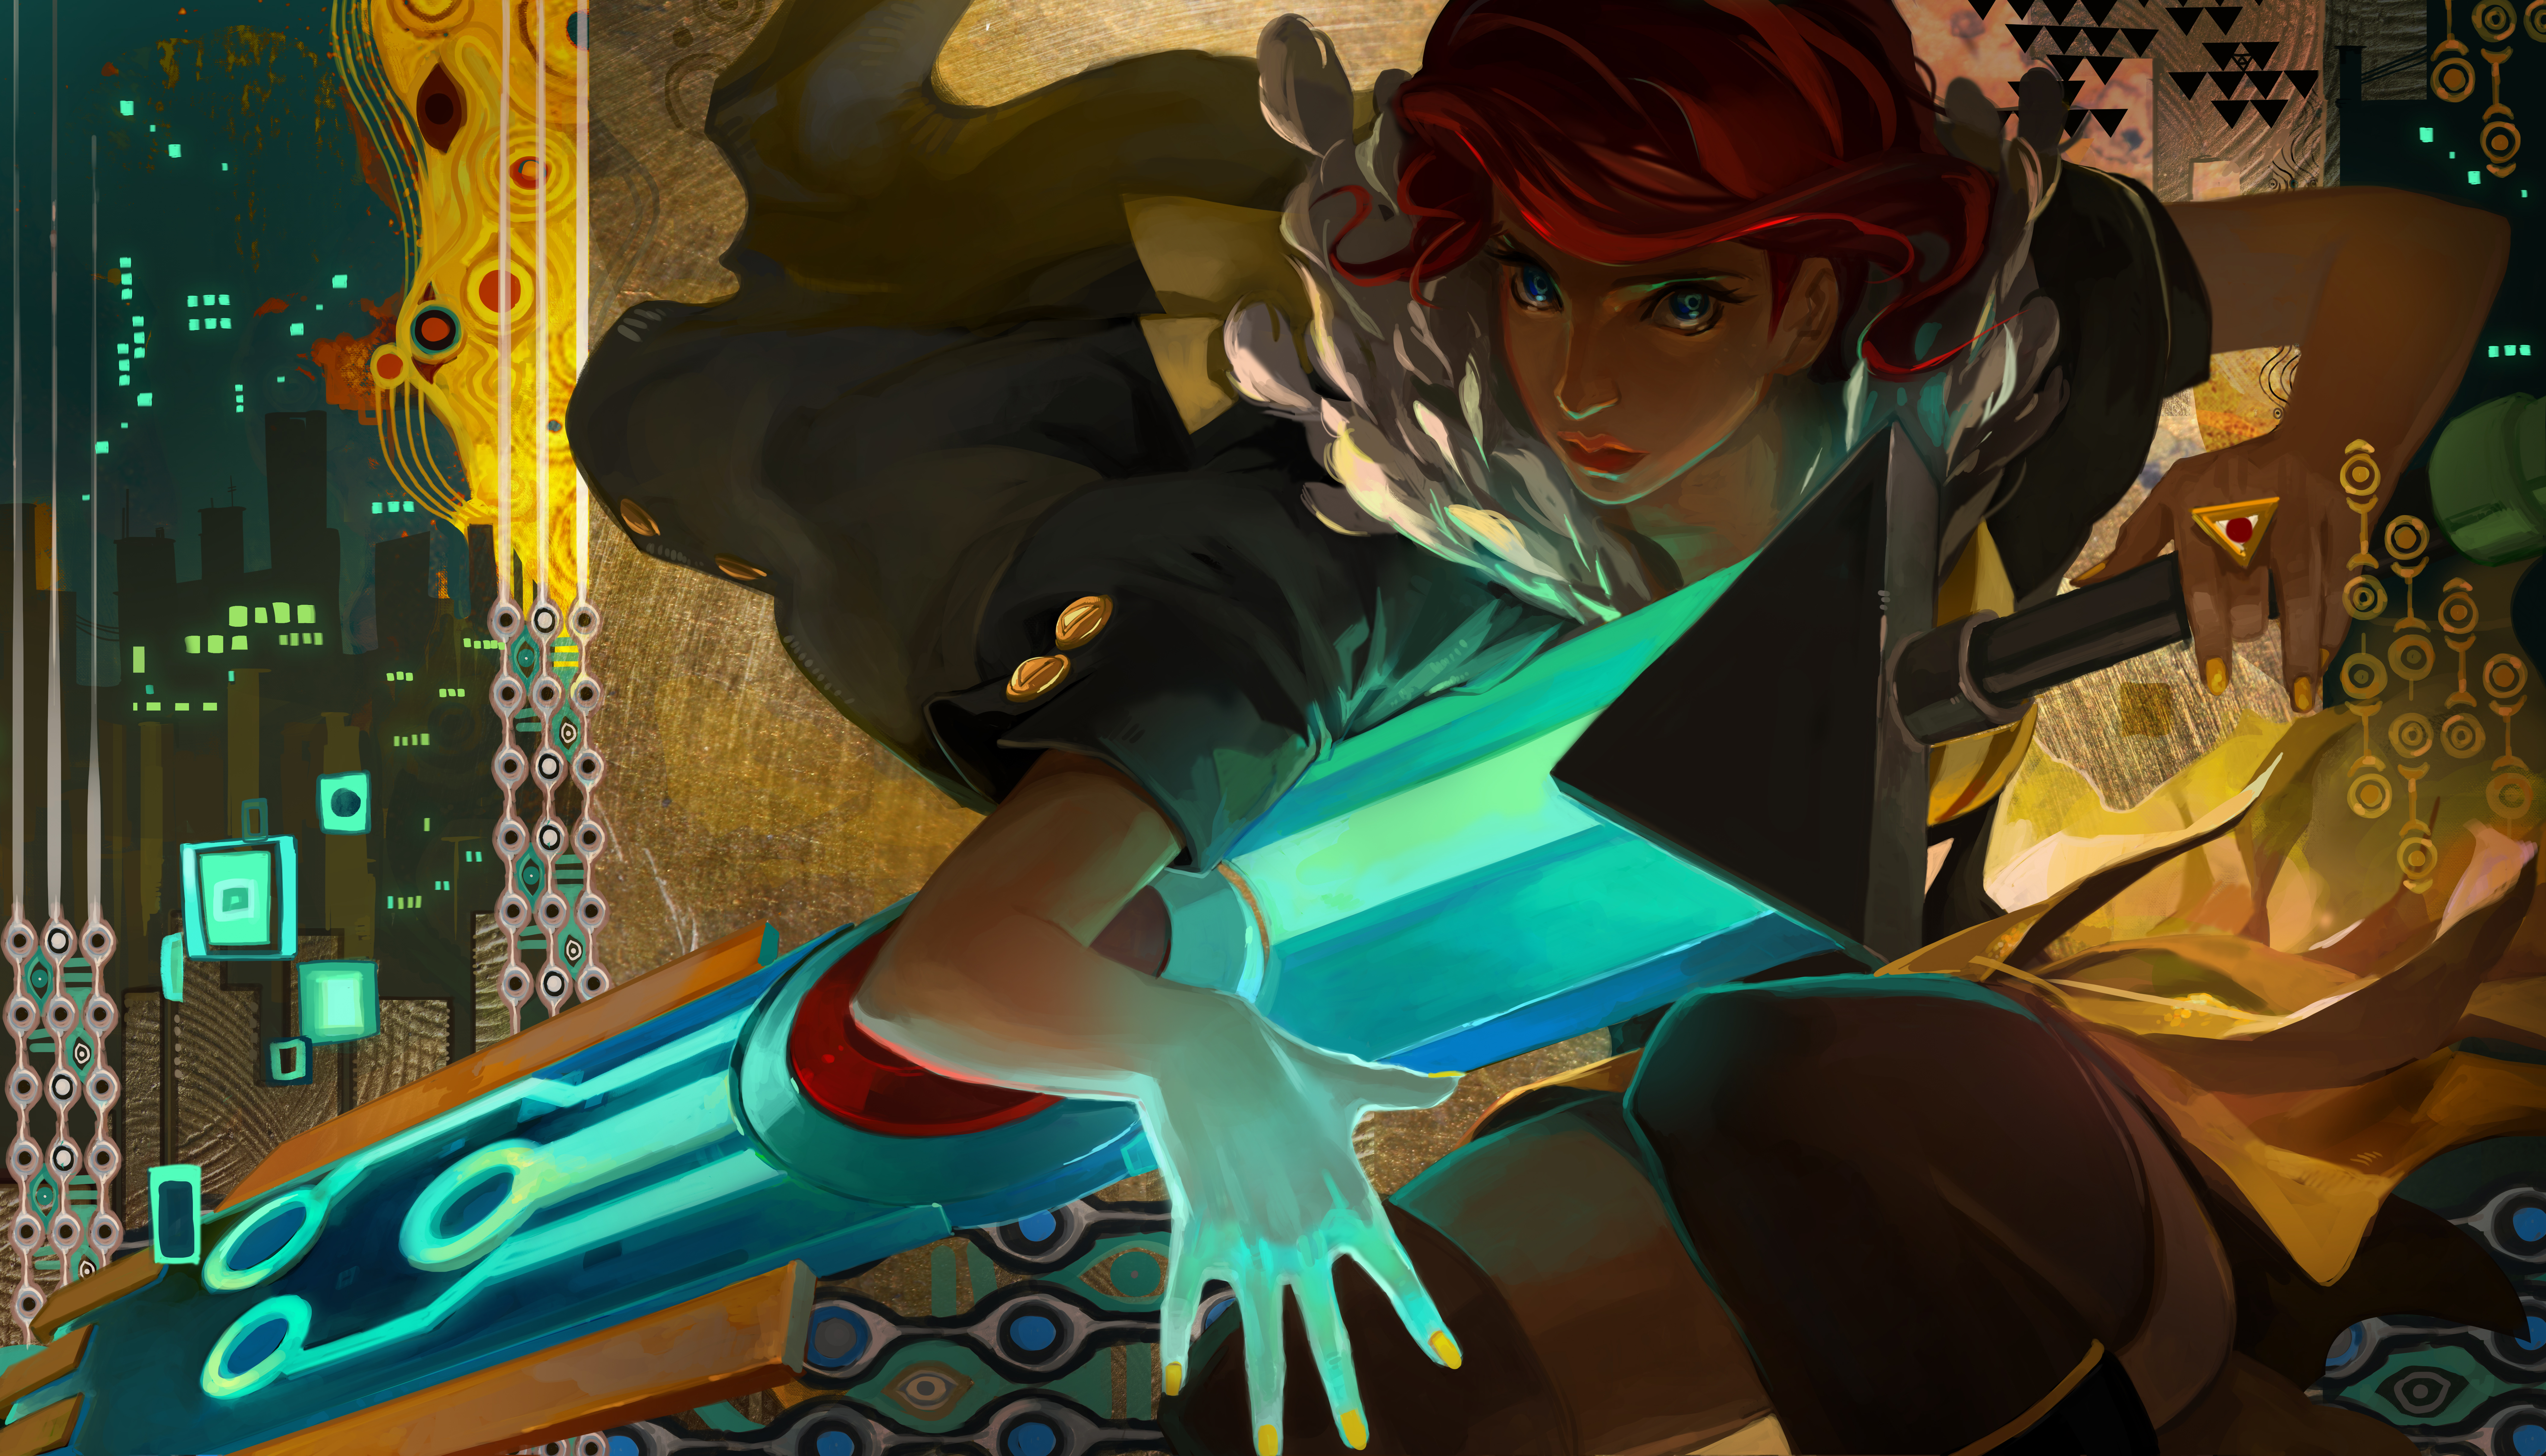 HD wallpaper of Red wielding a sword from the game Transistor, set against a vibrant, futuristic backdrop.